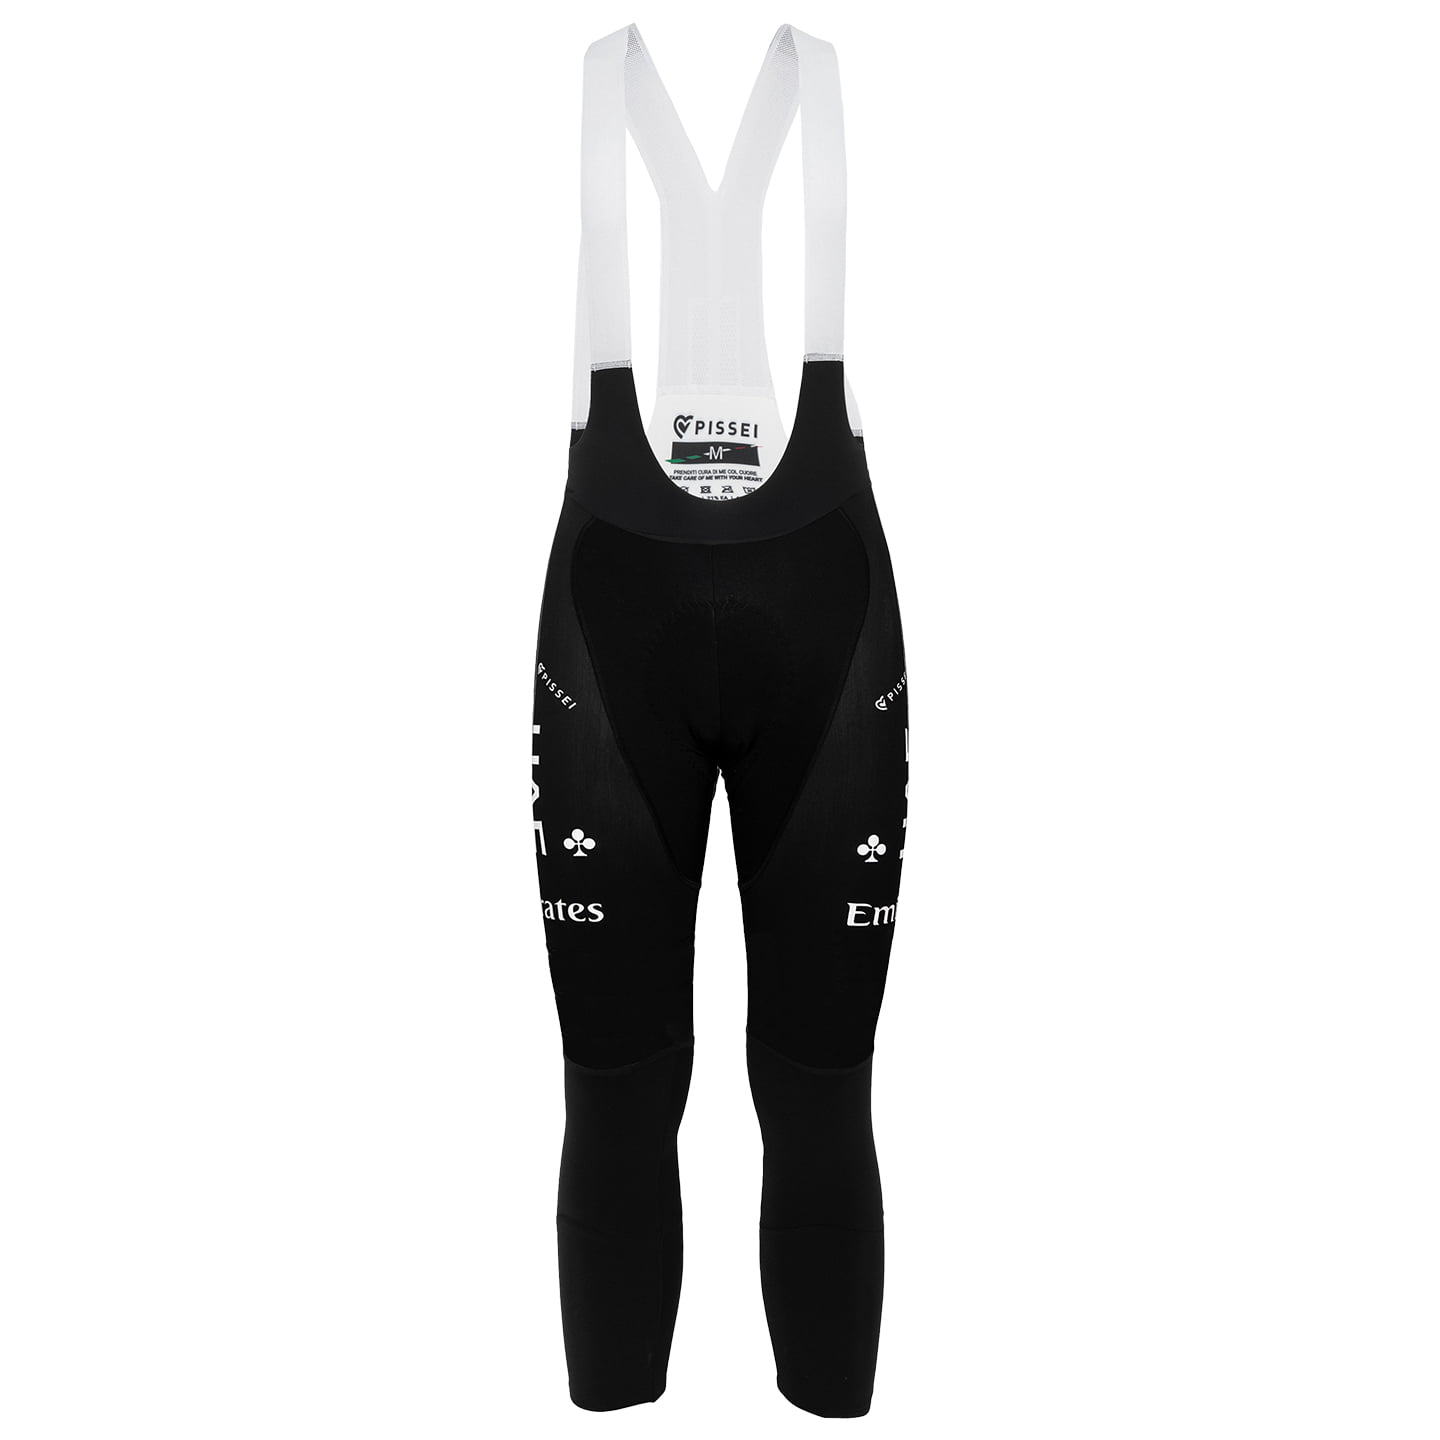 UAE TEAM EMIRATES 2024 Bib Tights, for men, size 2XL, Cycle trousers, Cycle gear